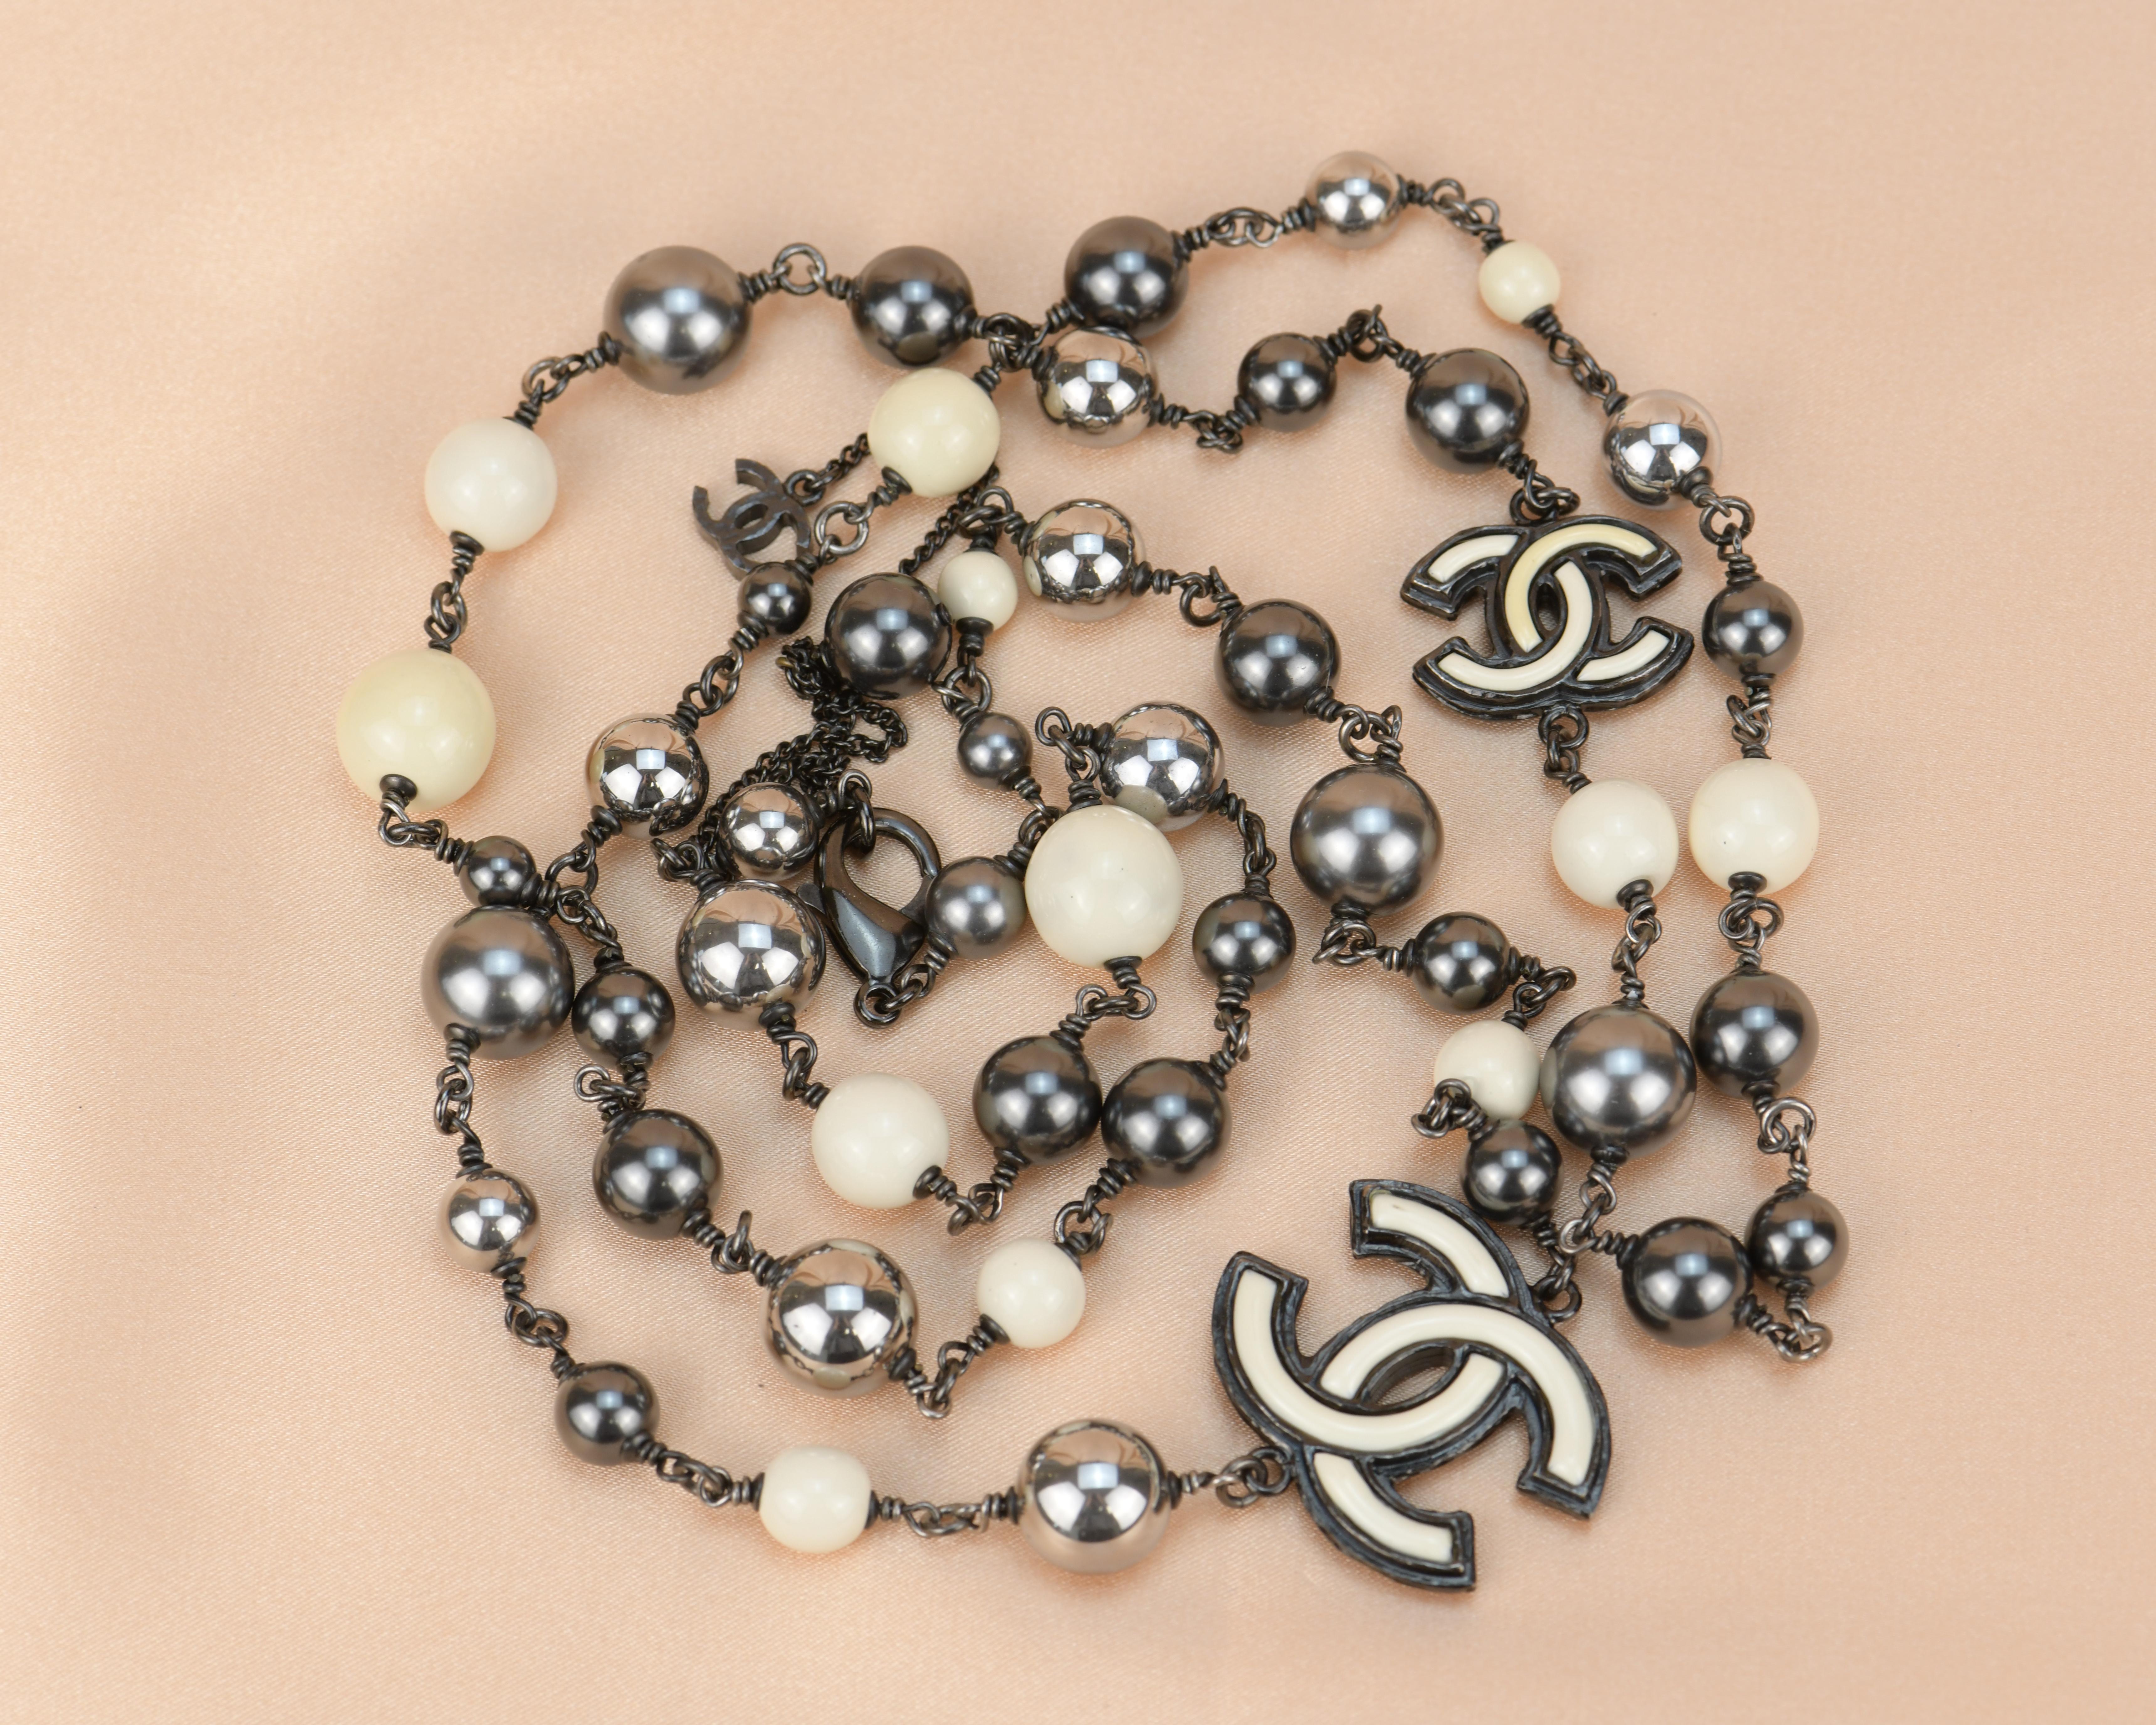 Chanel 2013 Pearl White and Black Beads CC Sautoir Necklace 1